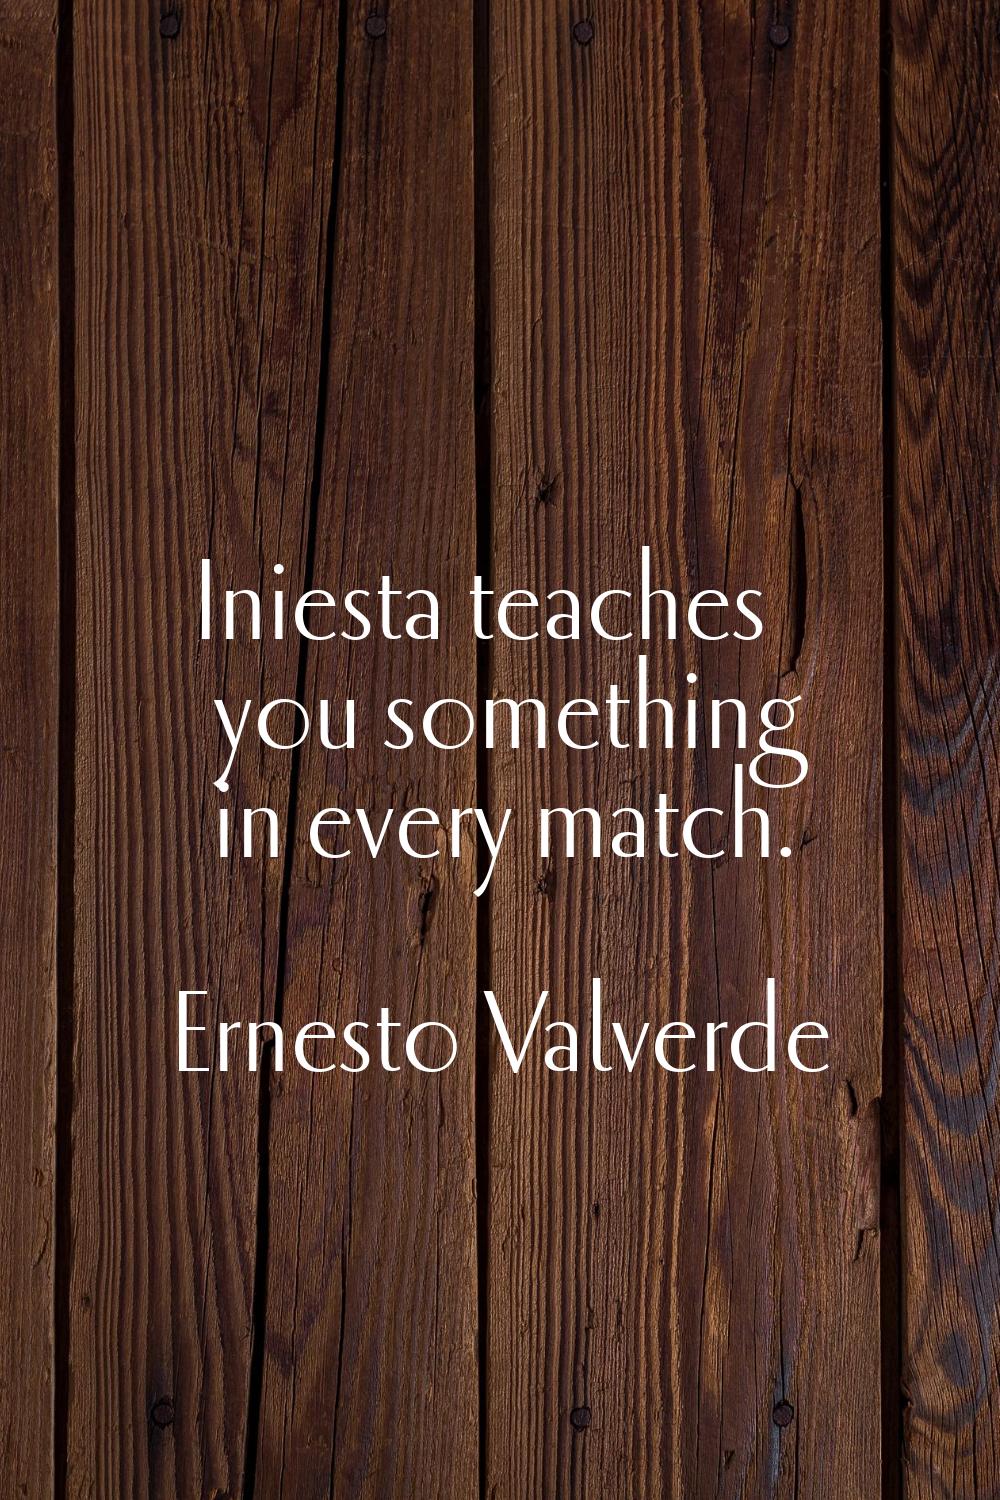 Iniesta teaches you something in every match.